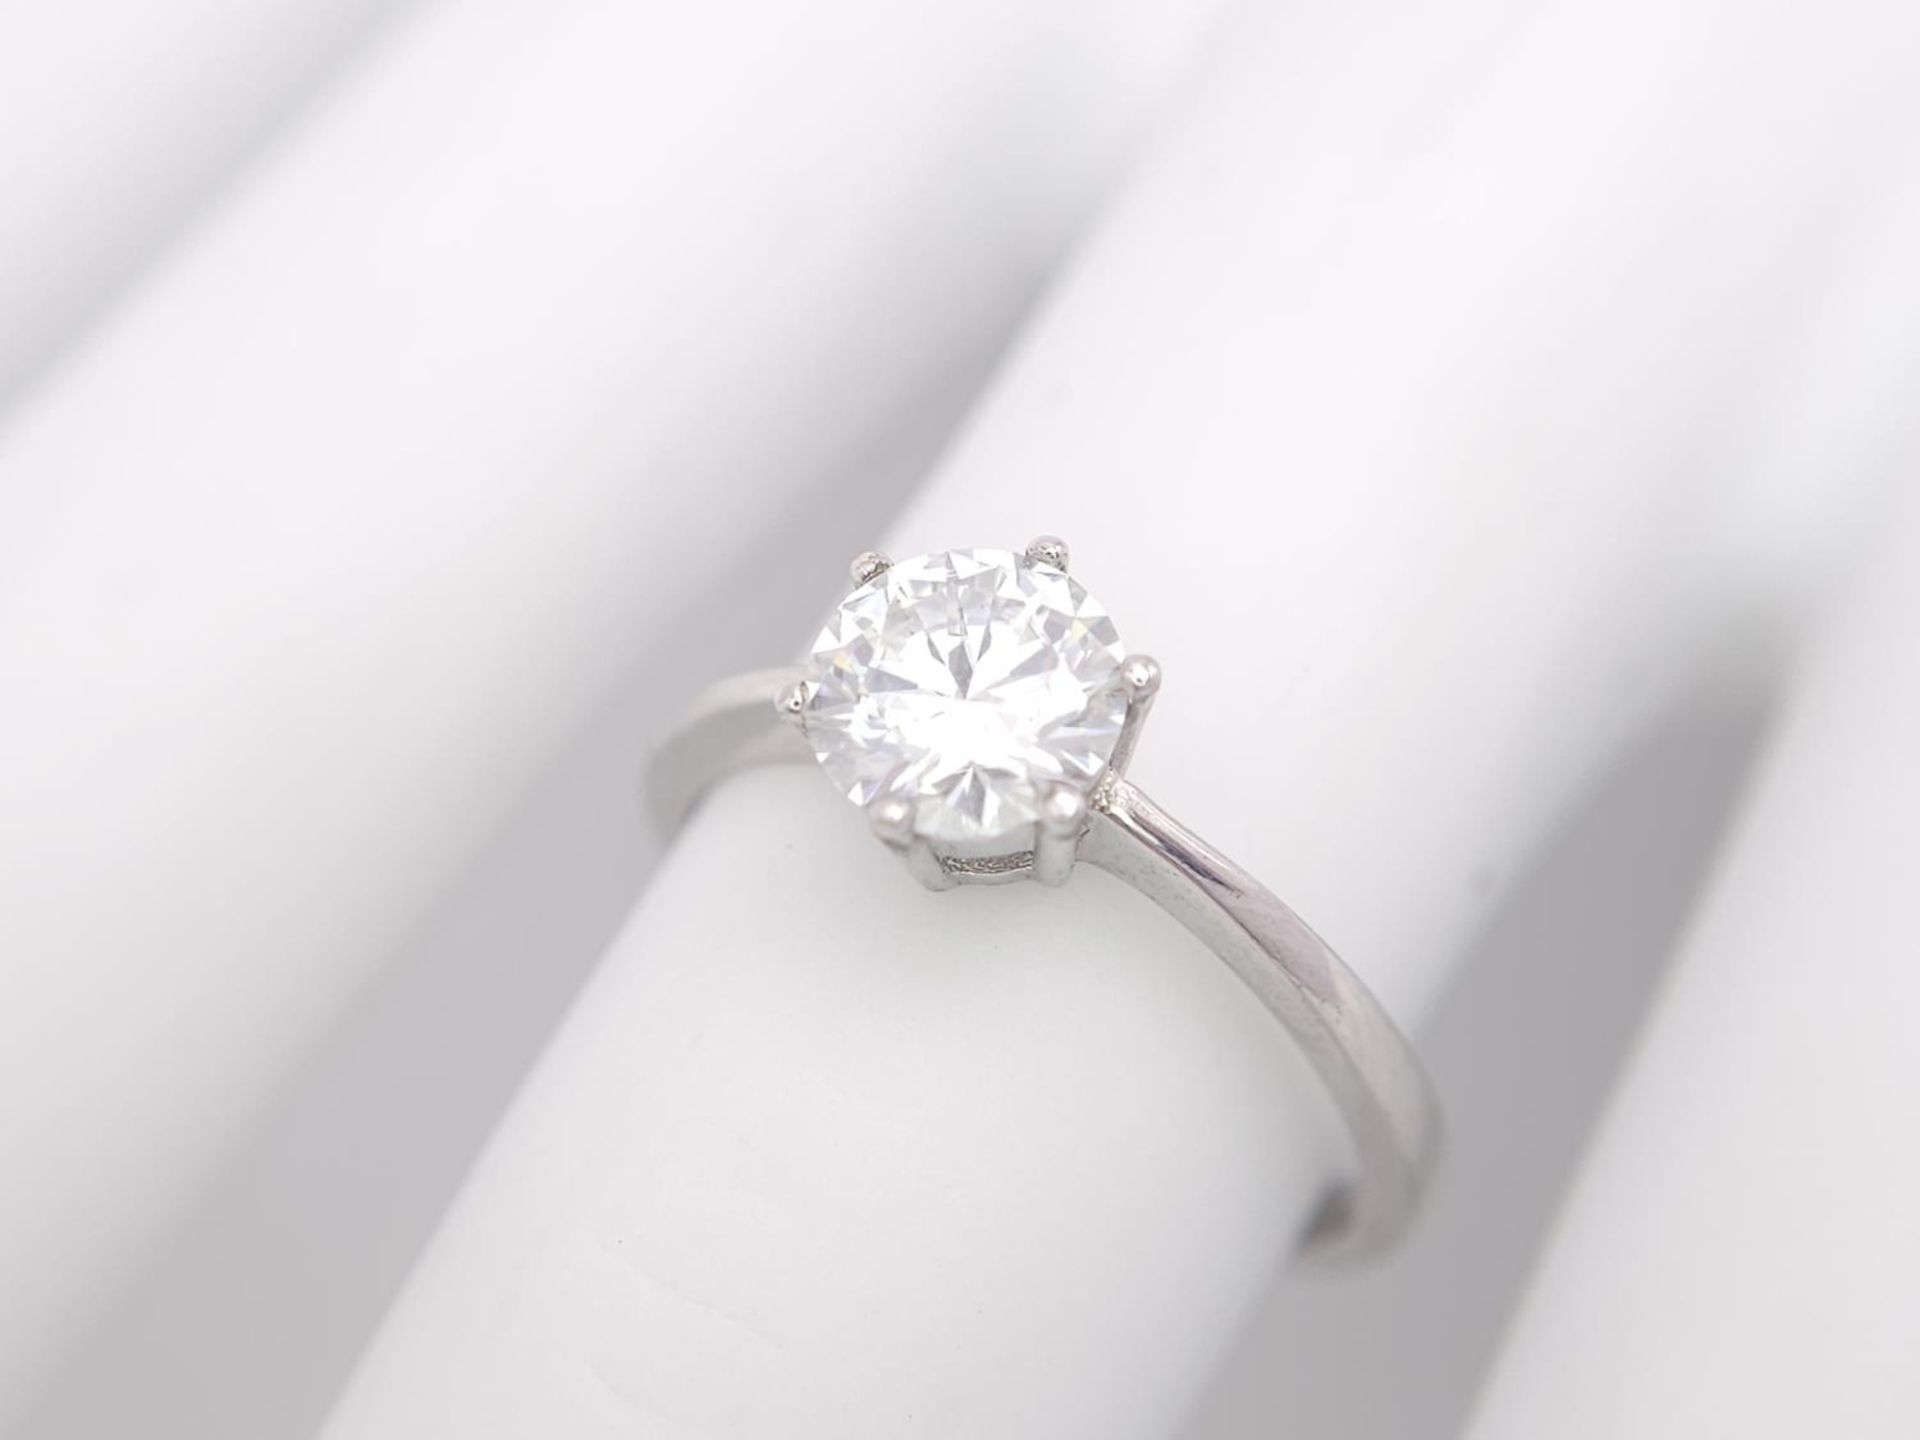 A 1ct Moissanite 925 Silver Ring. Size N. Comes with a GRA certificate. - Image 6 of 7